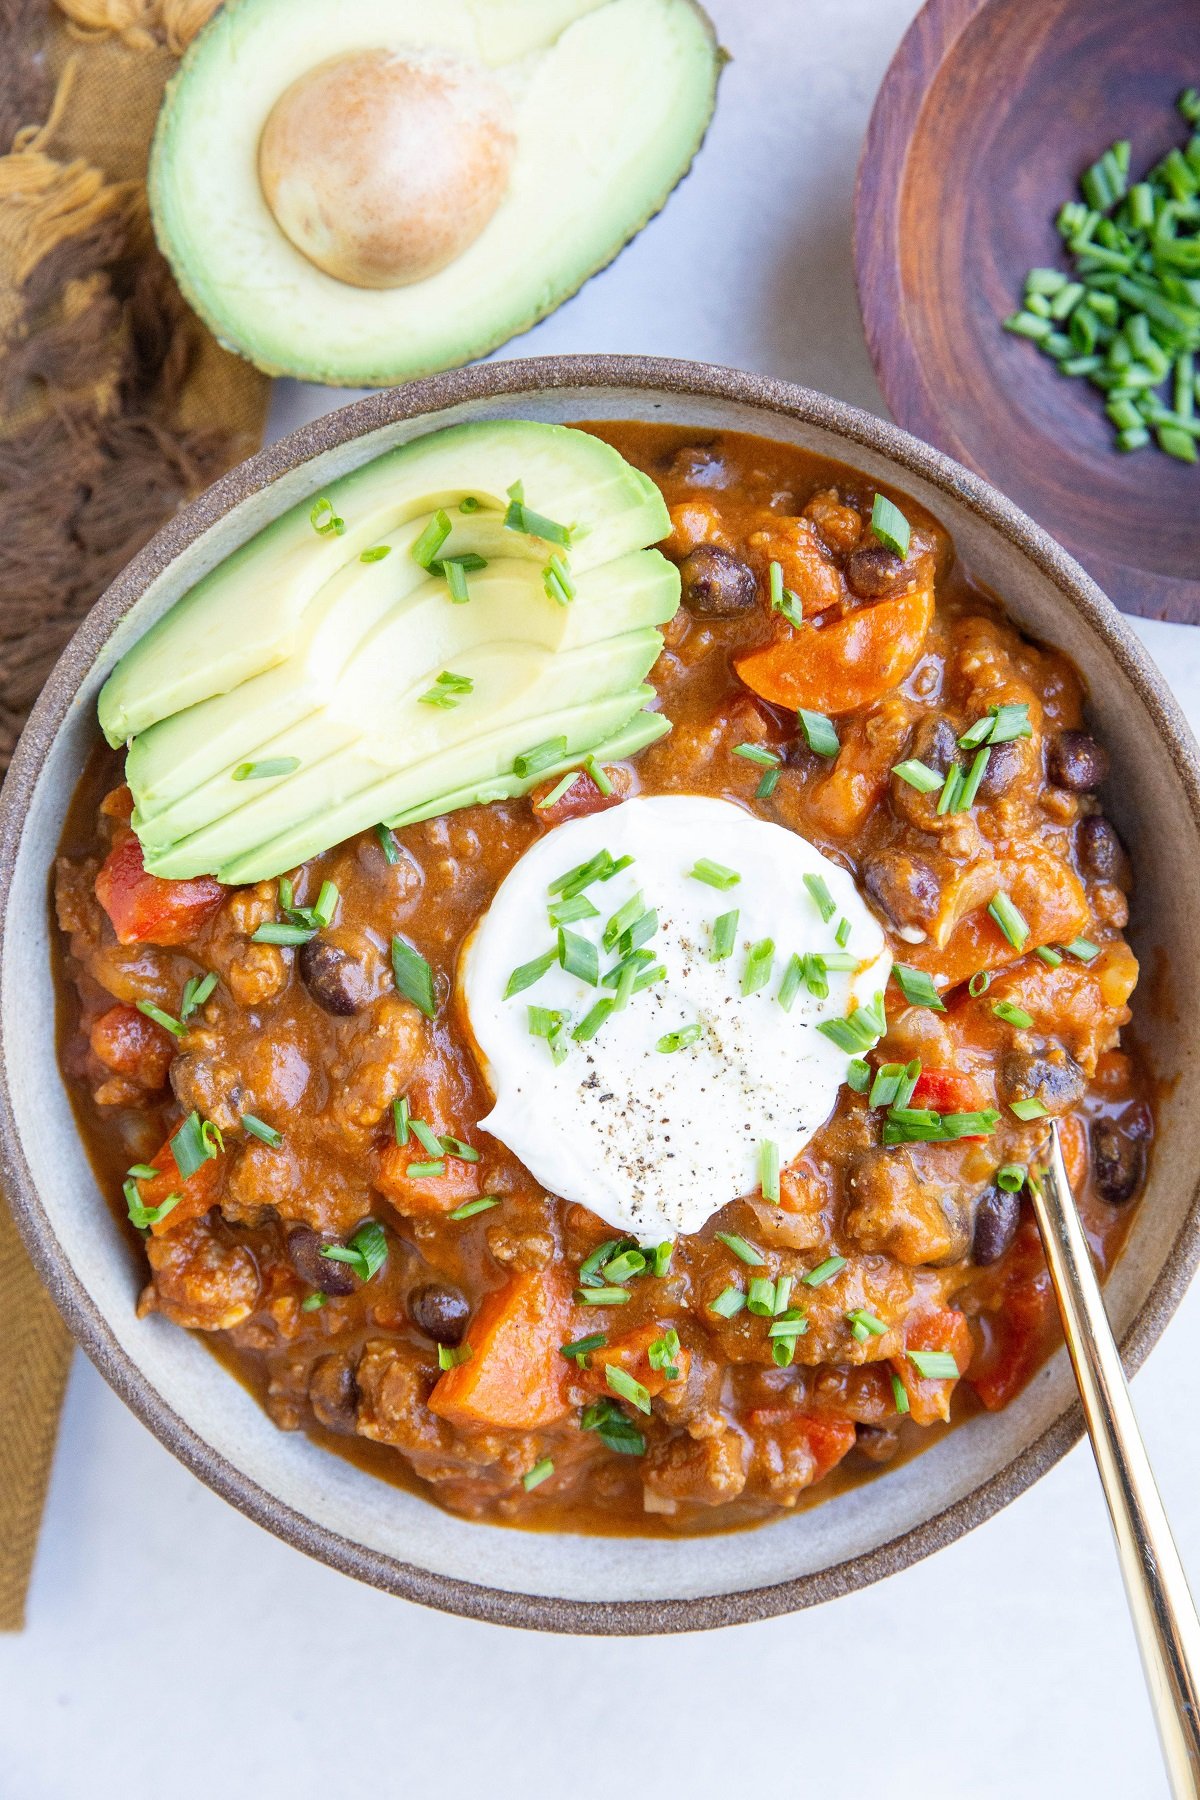 Bowl of beef pumpkin chili with sour cream, chives, and avocado on top.